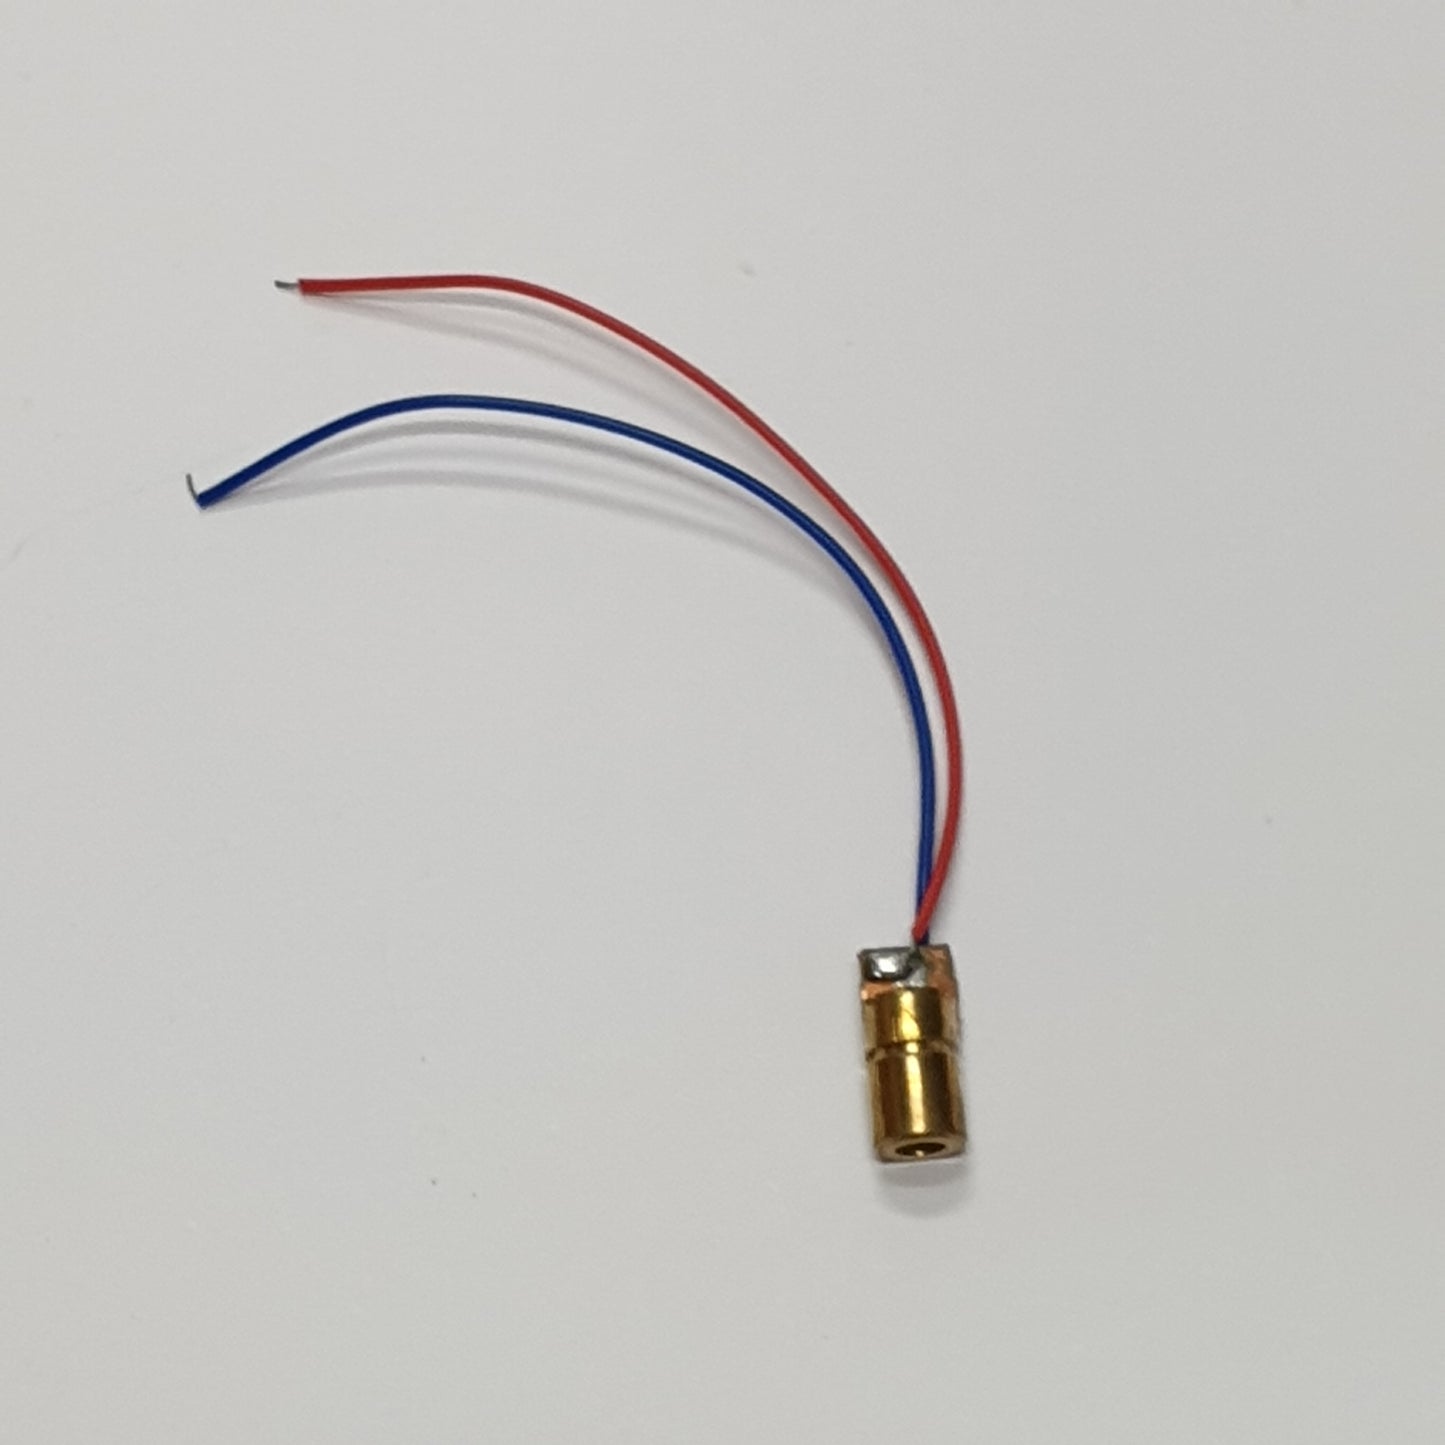 Laser Pointing Module/Component